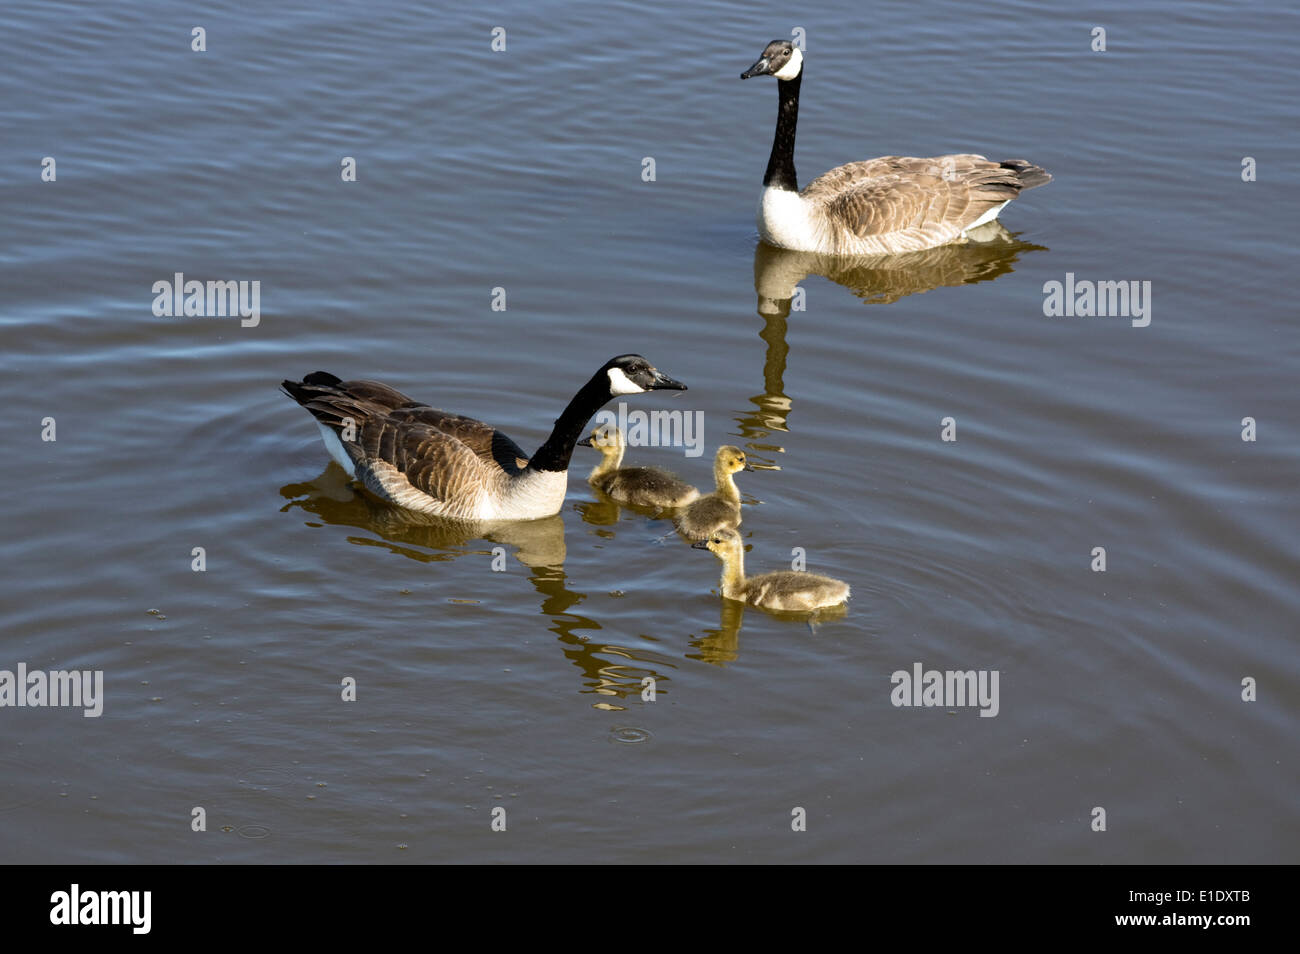 Canada Geese, Branta canadensis adults and goslings swimming Stock Photo